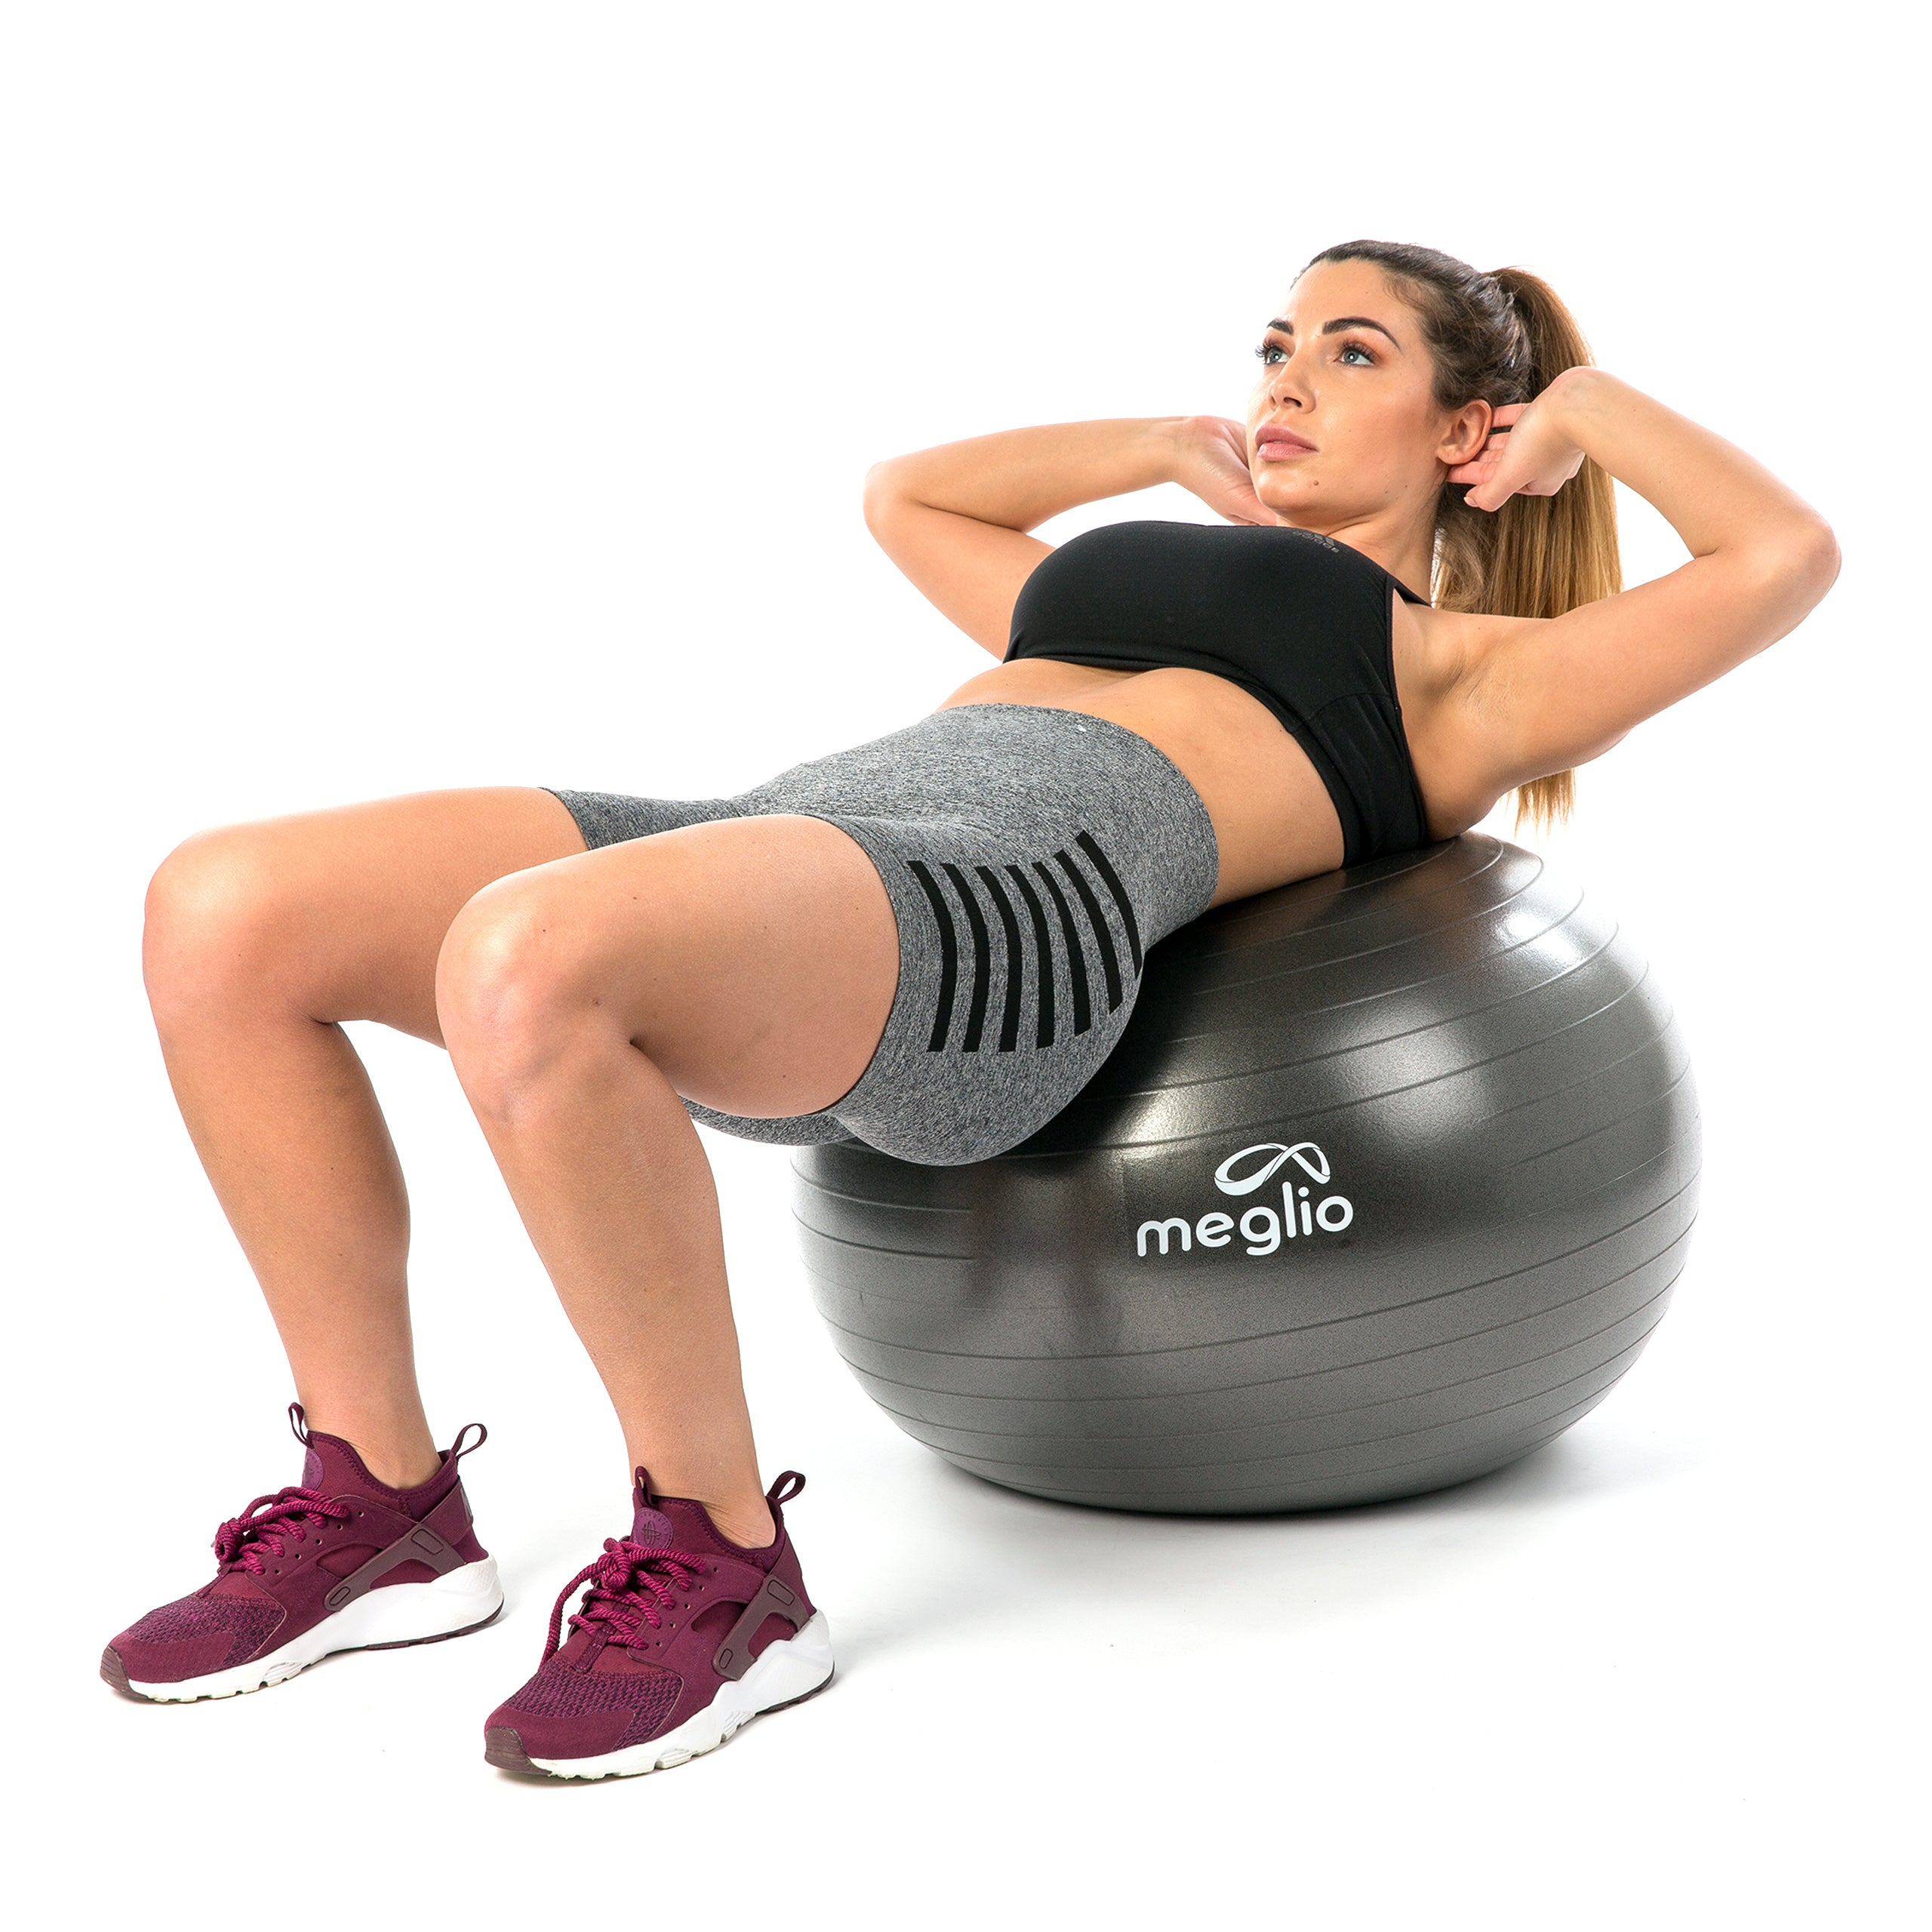 The Benefits and Drawbacks of Sitting on a Stability Ball